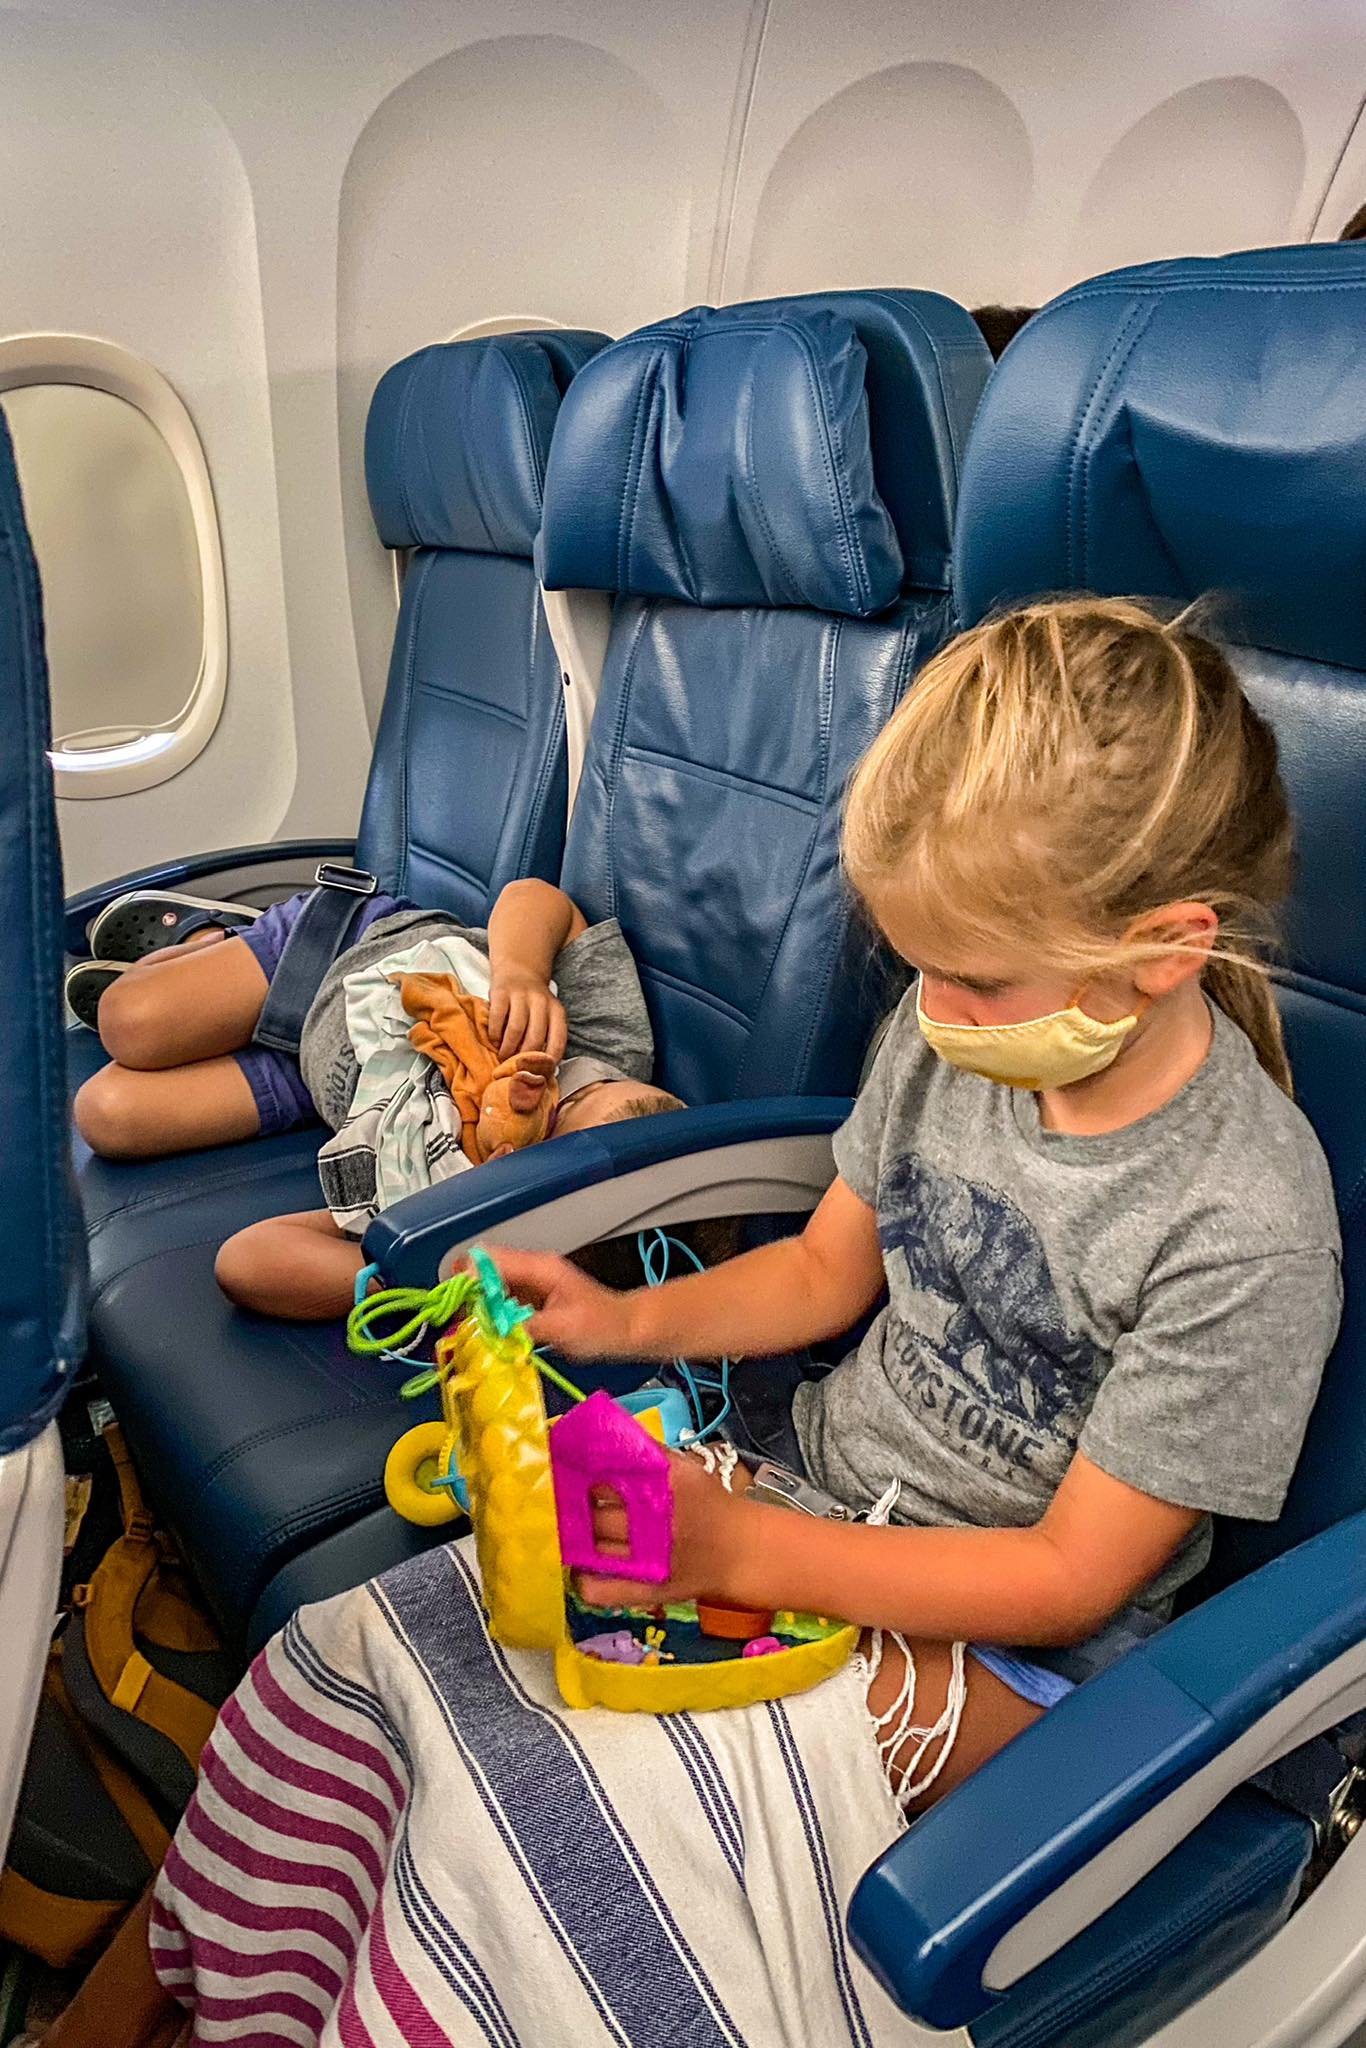 The Best Airplane Activities for Kids + Airplane Toys for Toddlers   Airplane activities, Kids travel activities, Kids airplane activities